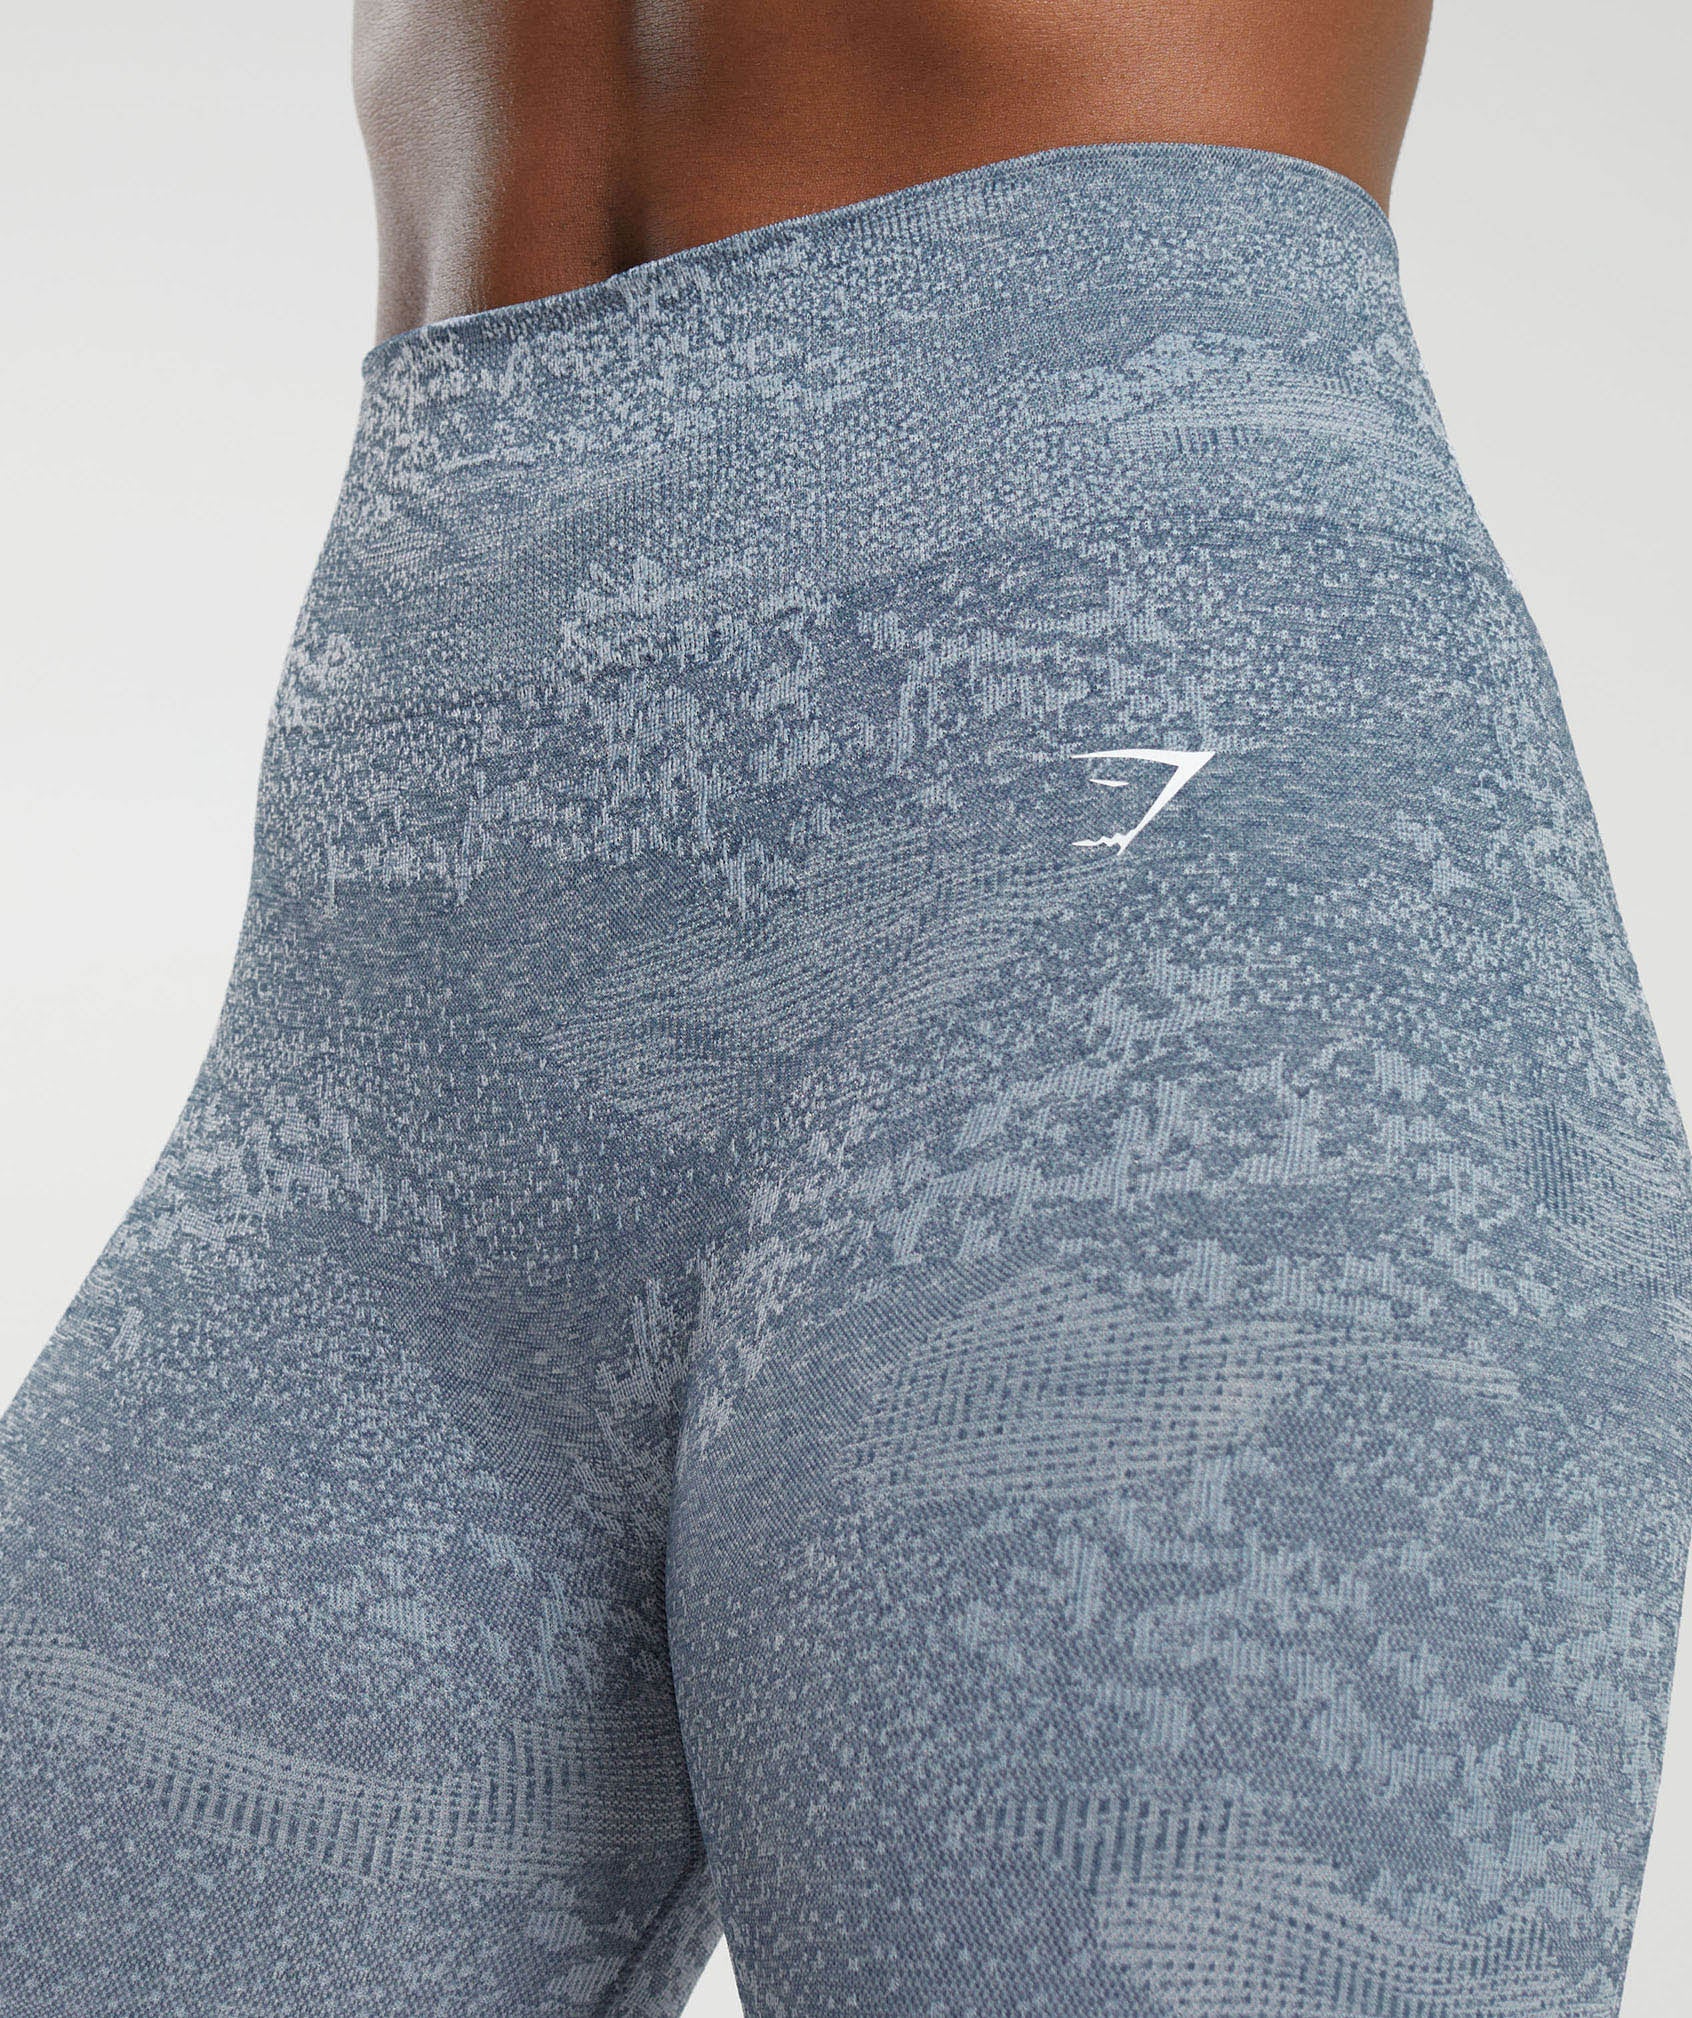 Adapt Camo Seamless Leggings in  River Stone Grey/Evening Blue - view 6